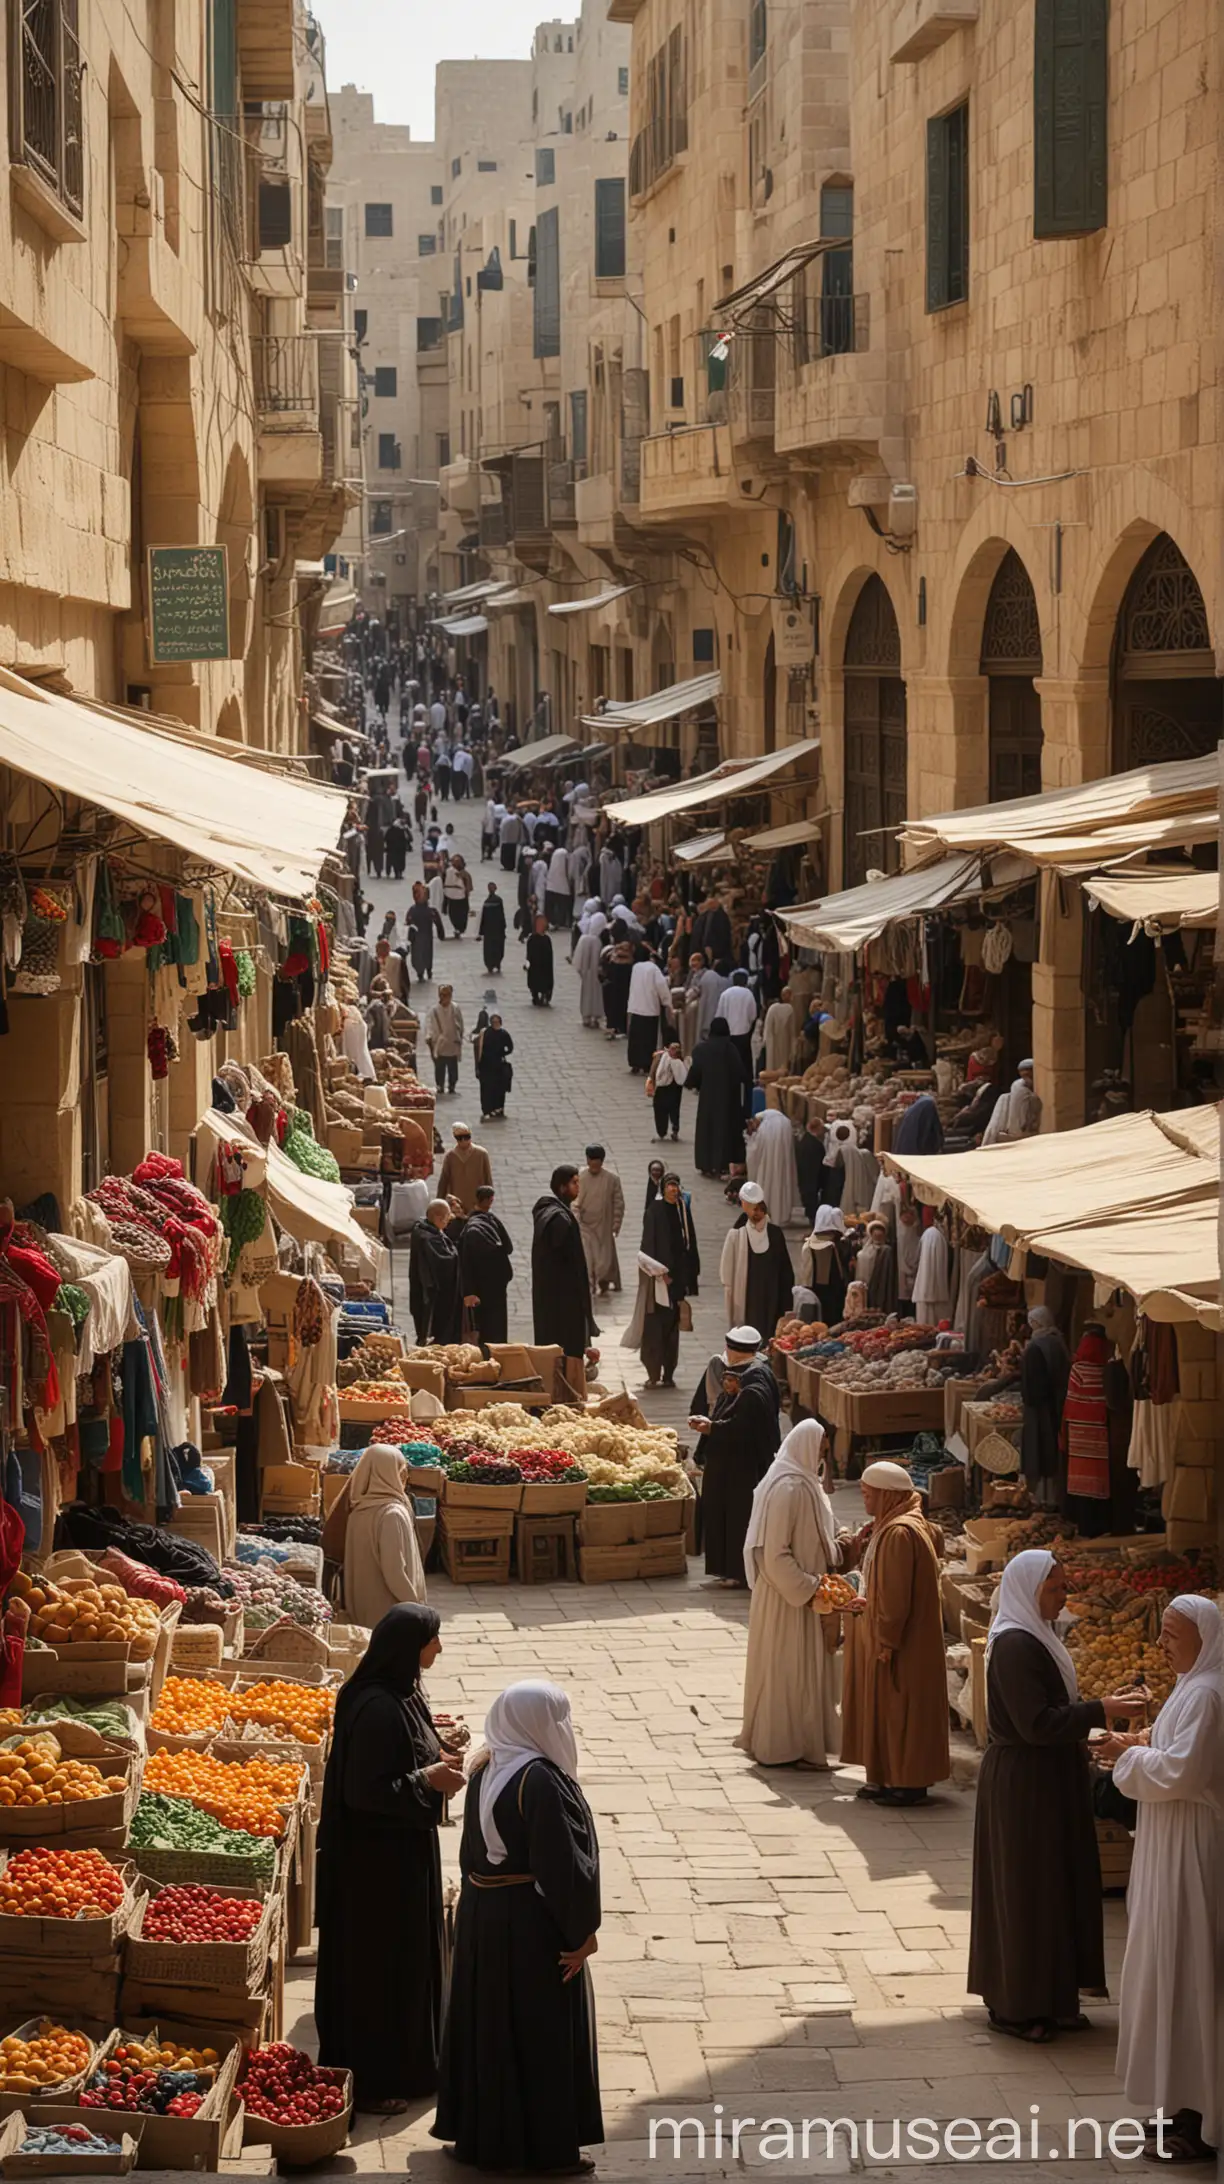 A serene scene depicting people from different religious backgrounds peacefully coexisting in a marketplace in historic Palestine, exchanging goods and engaging in friendly interactions.